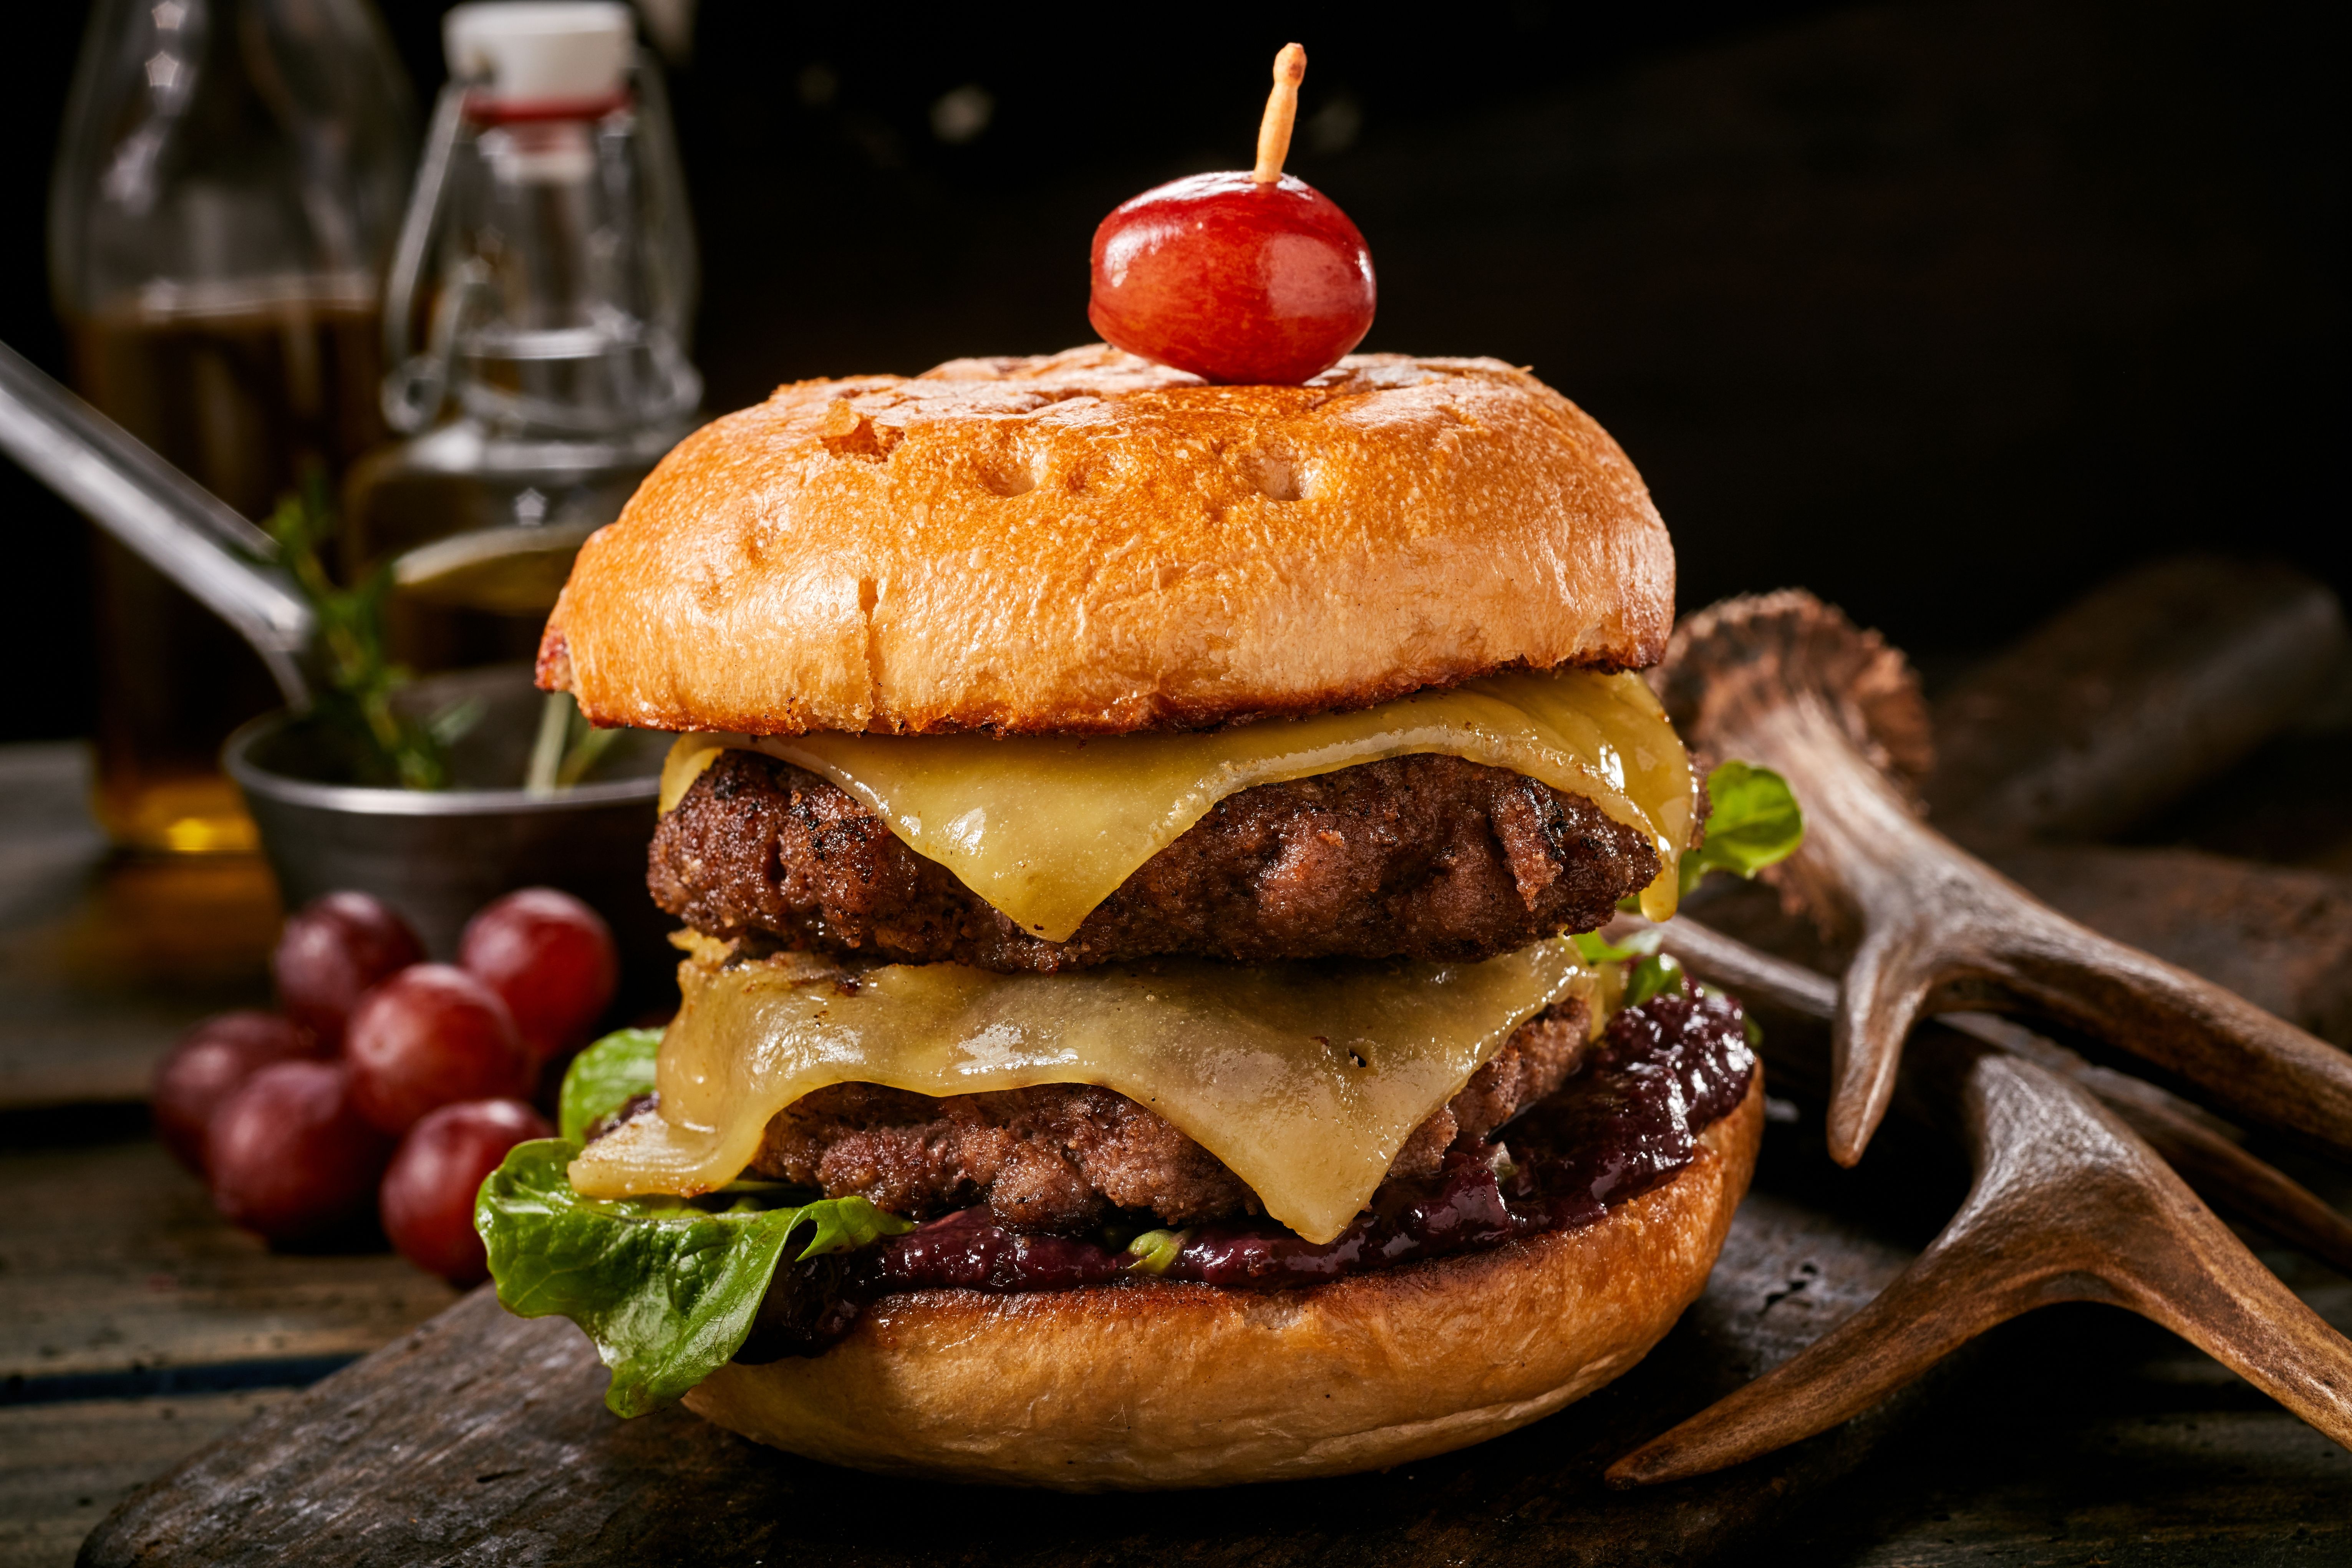 Delicious double venison cheeseburger with olives and melting cheese on a toasted crusty bun served on a rustic wooden table alongside deer antlers